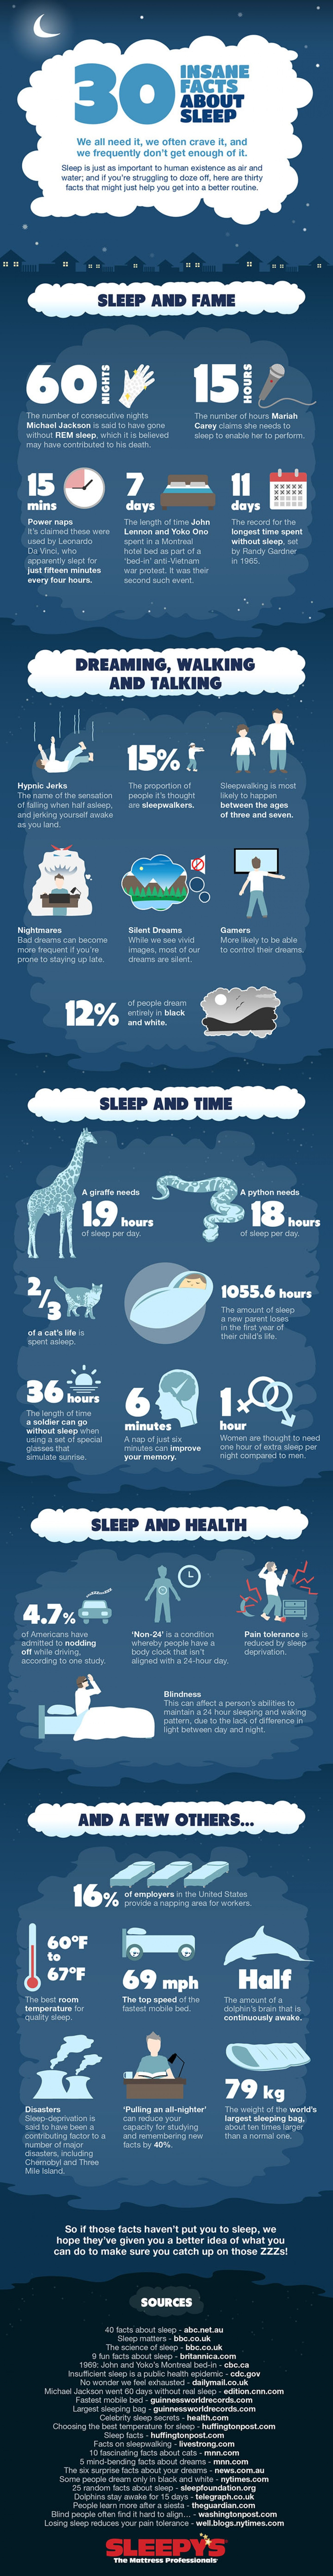 13 the-insane-facts-about-sleep_53468885e1d1c_w1500